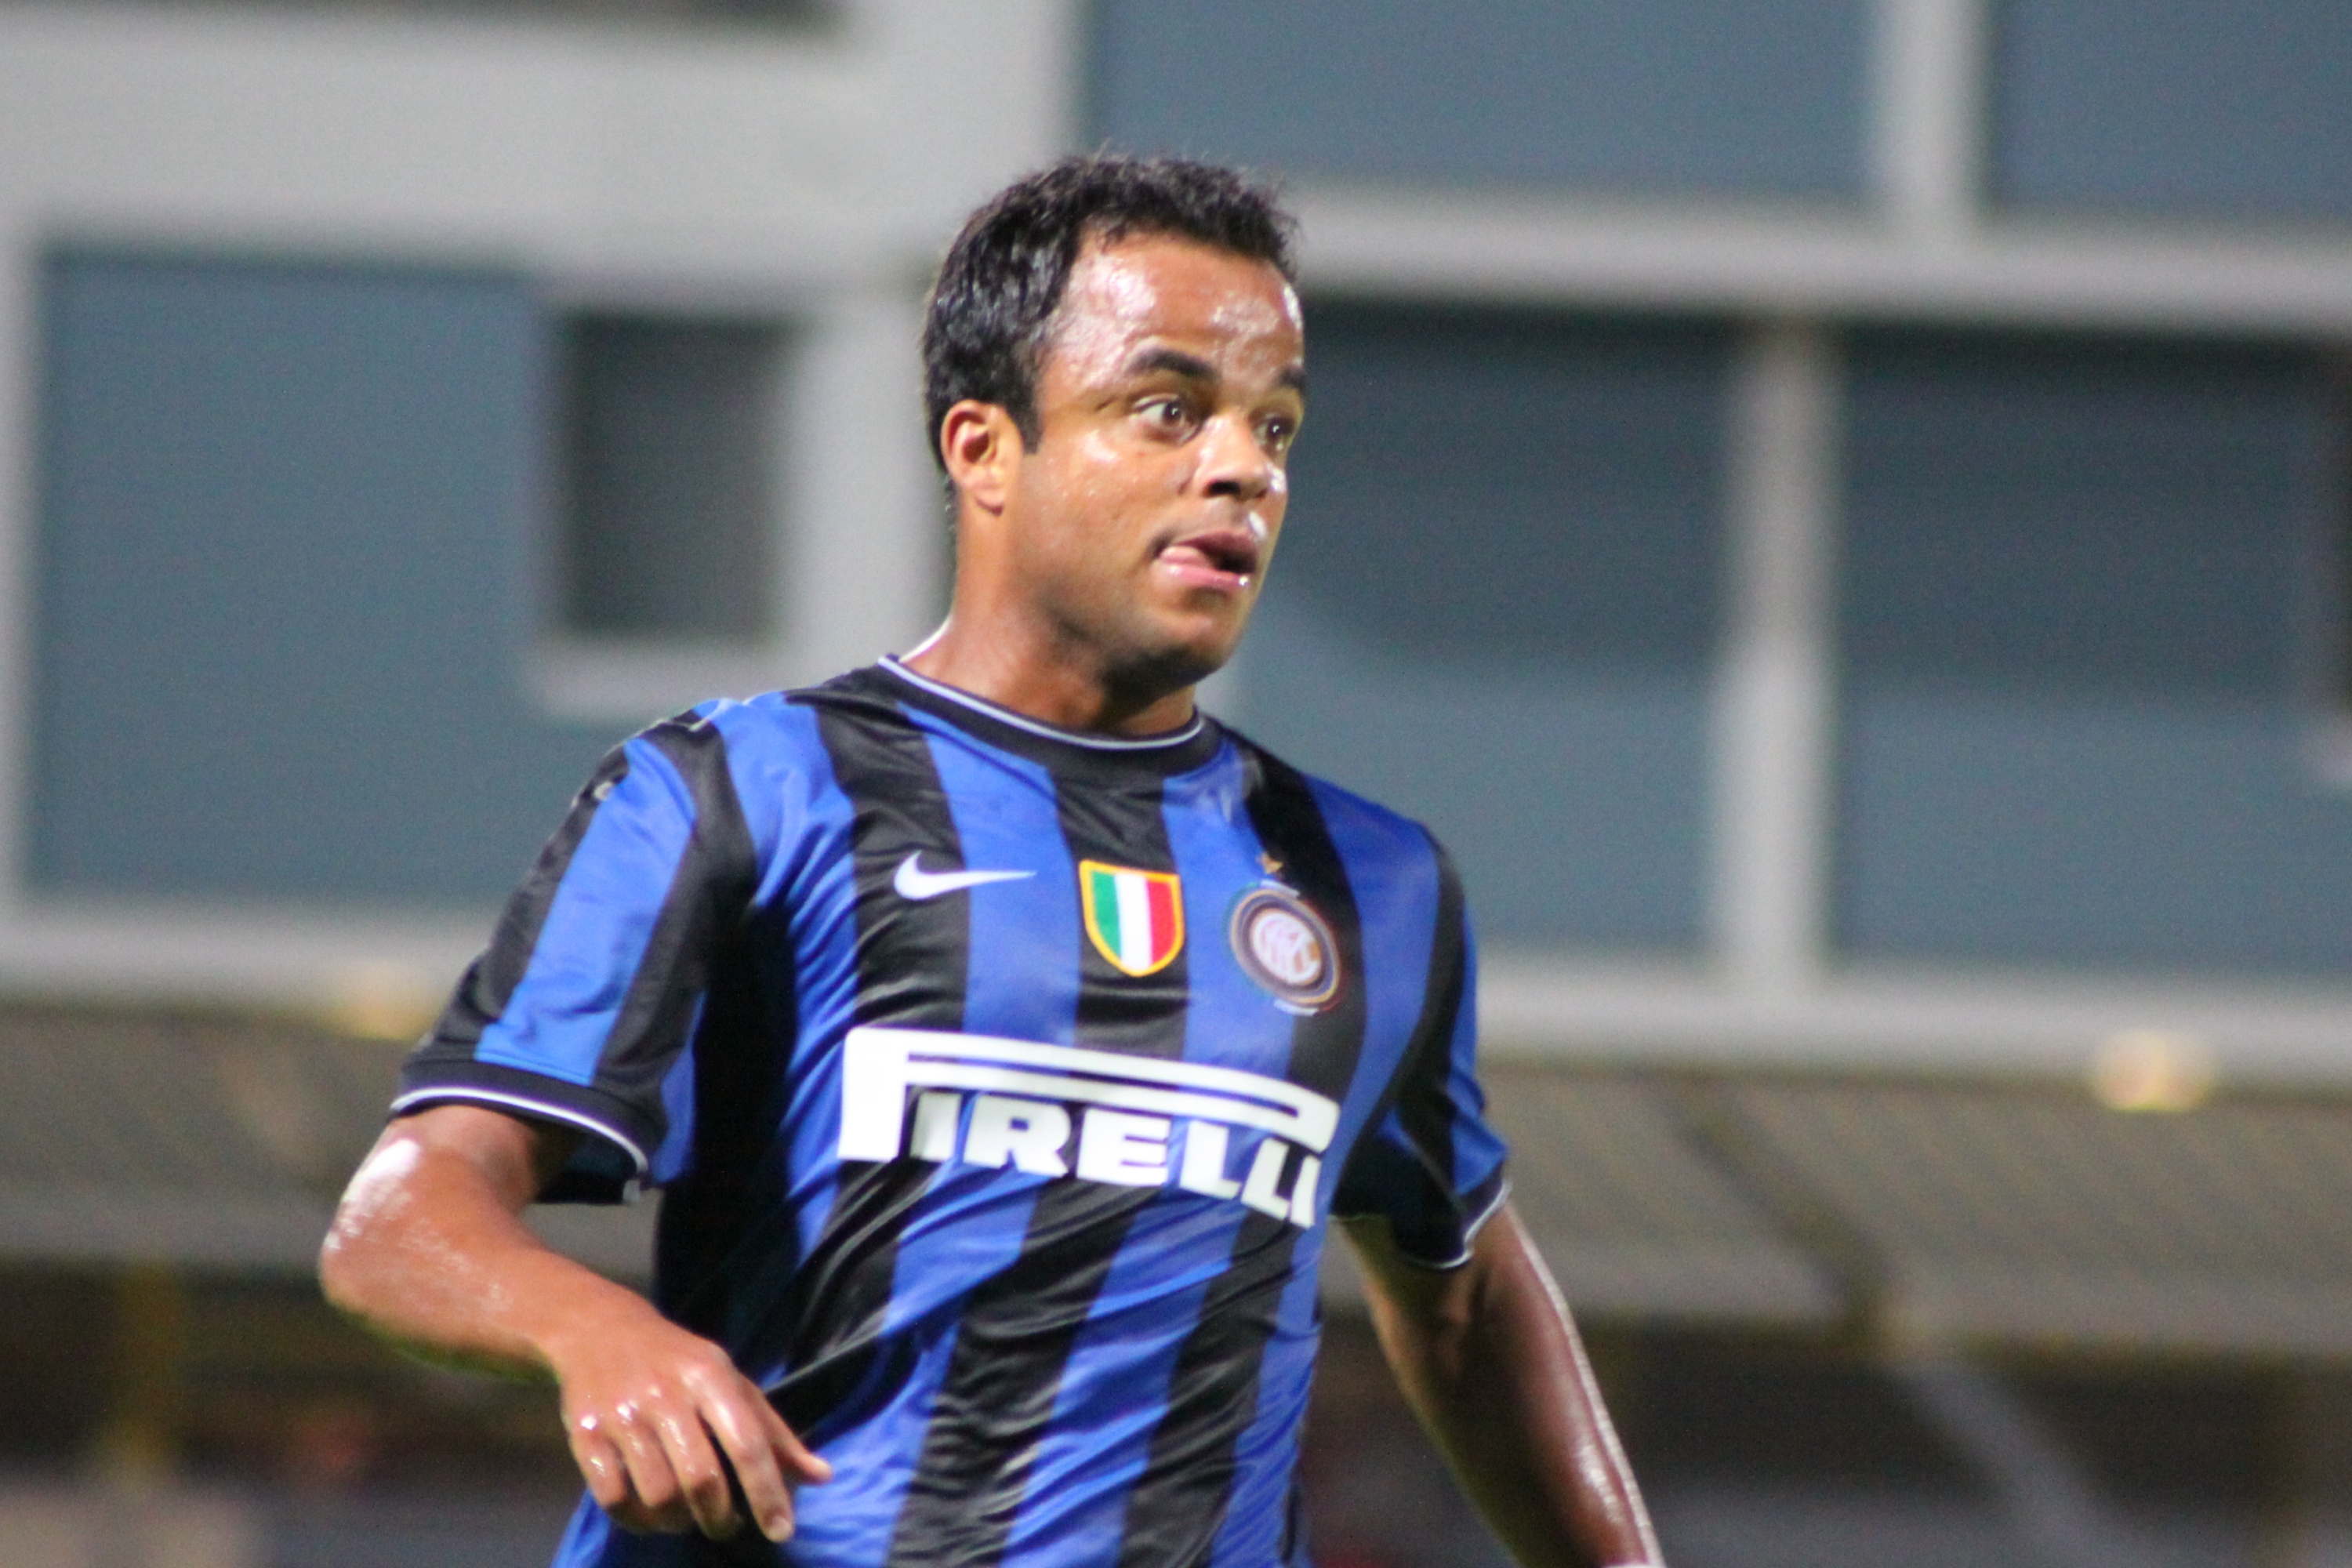 Ex-Inter Winger Amantino Mancini: “Inter Have The Most Technical Quality And Are A Step Above”